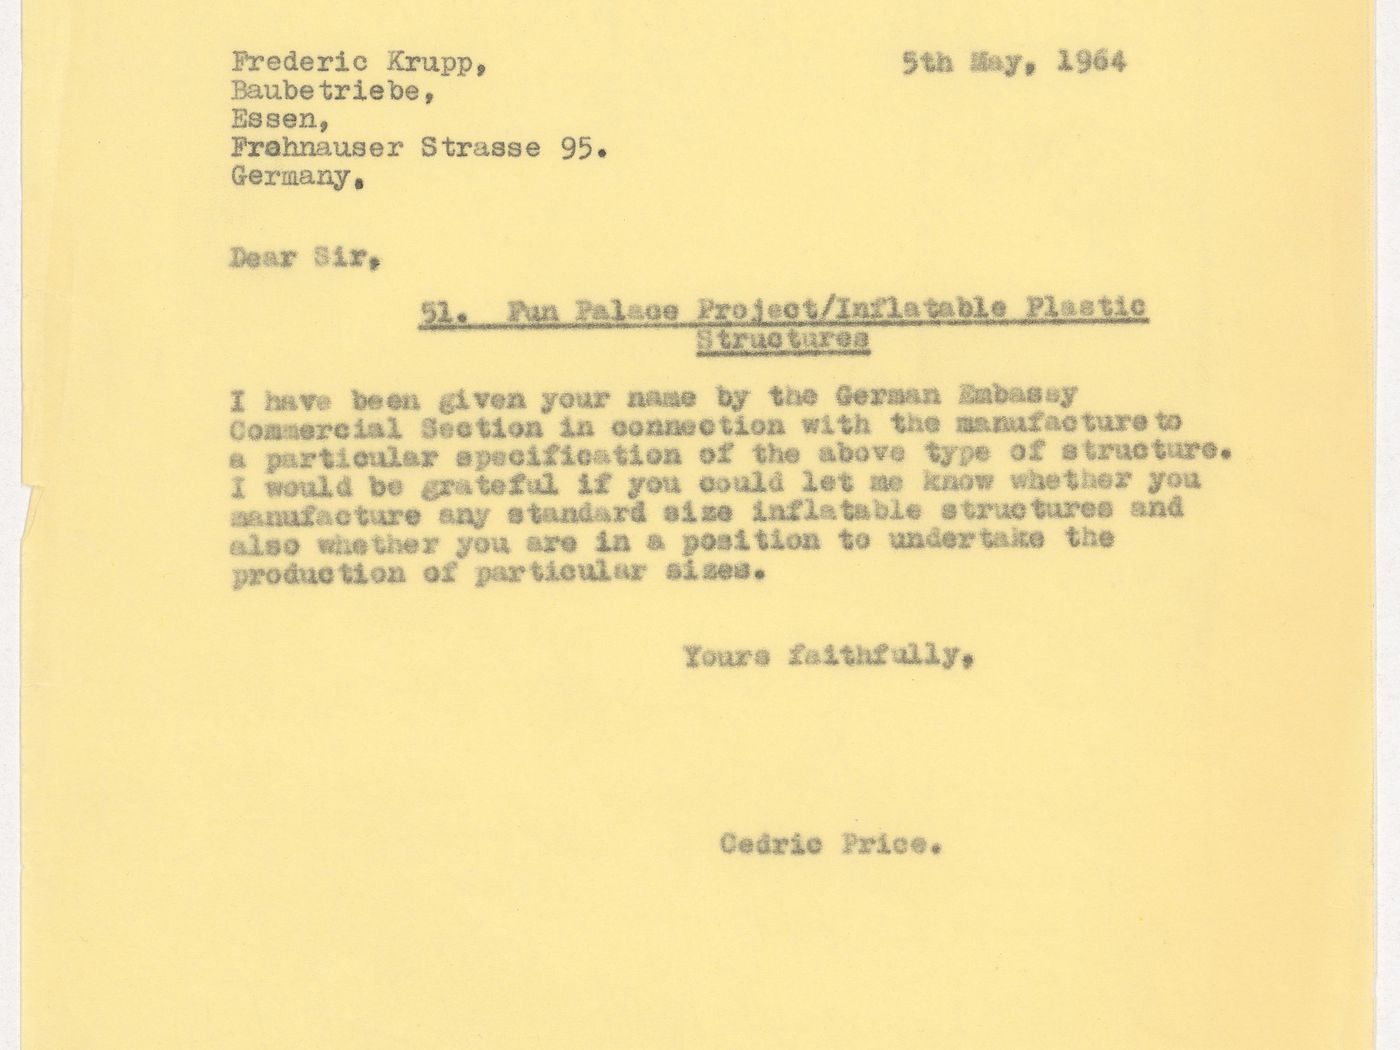 Letter from Cedric Price to Frederic Krupp about Fun Palace Project